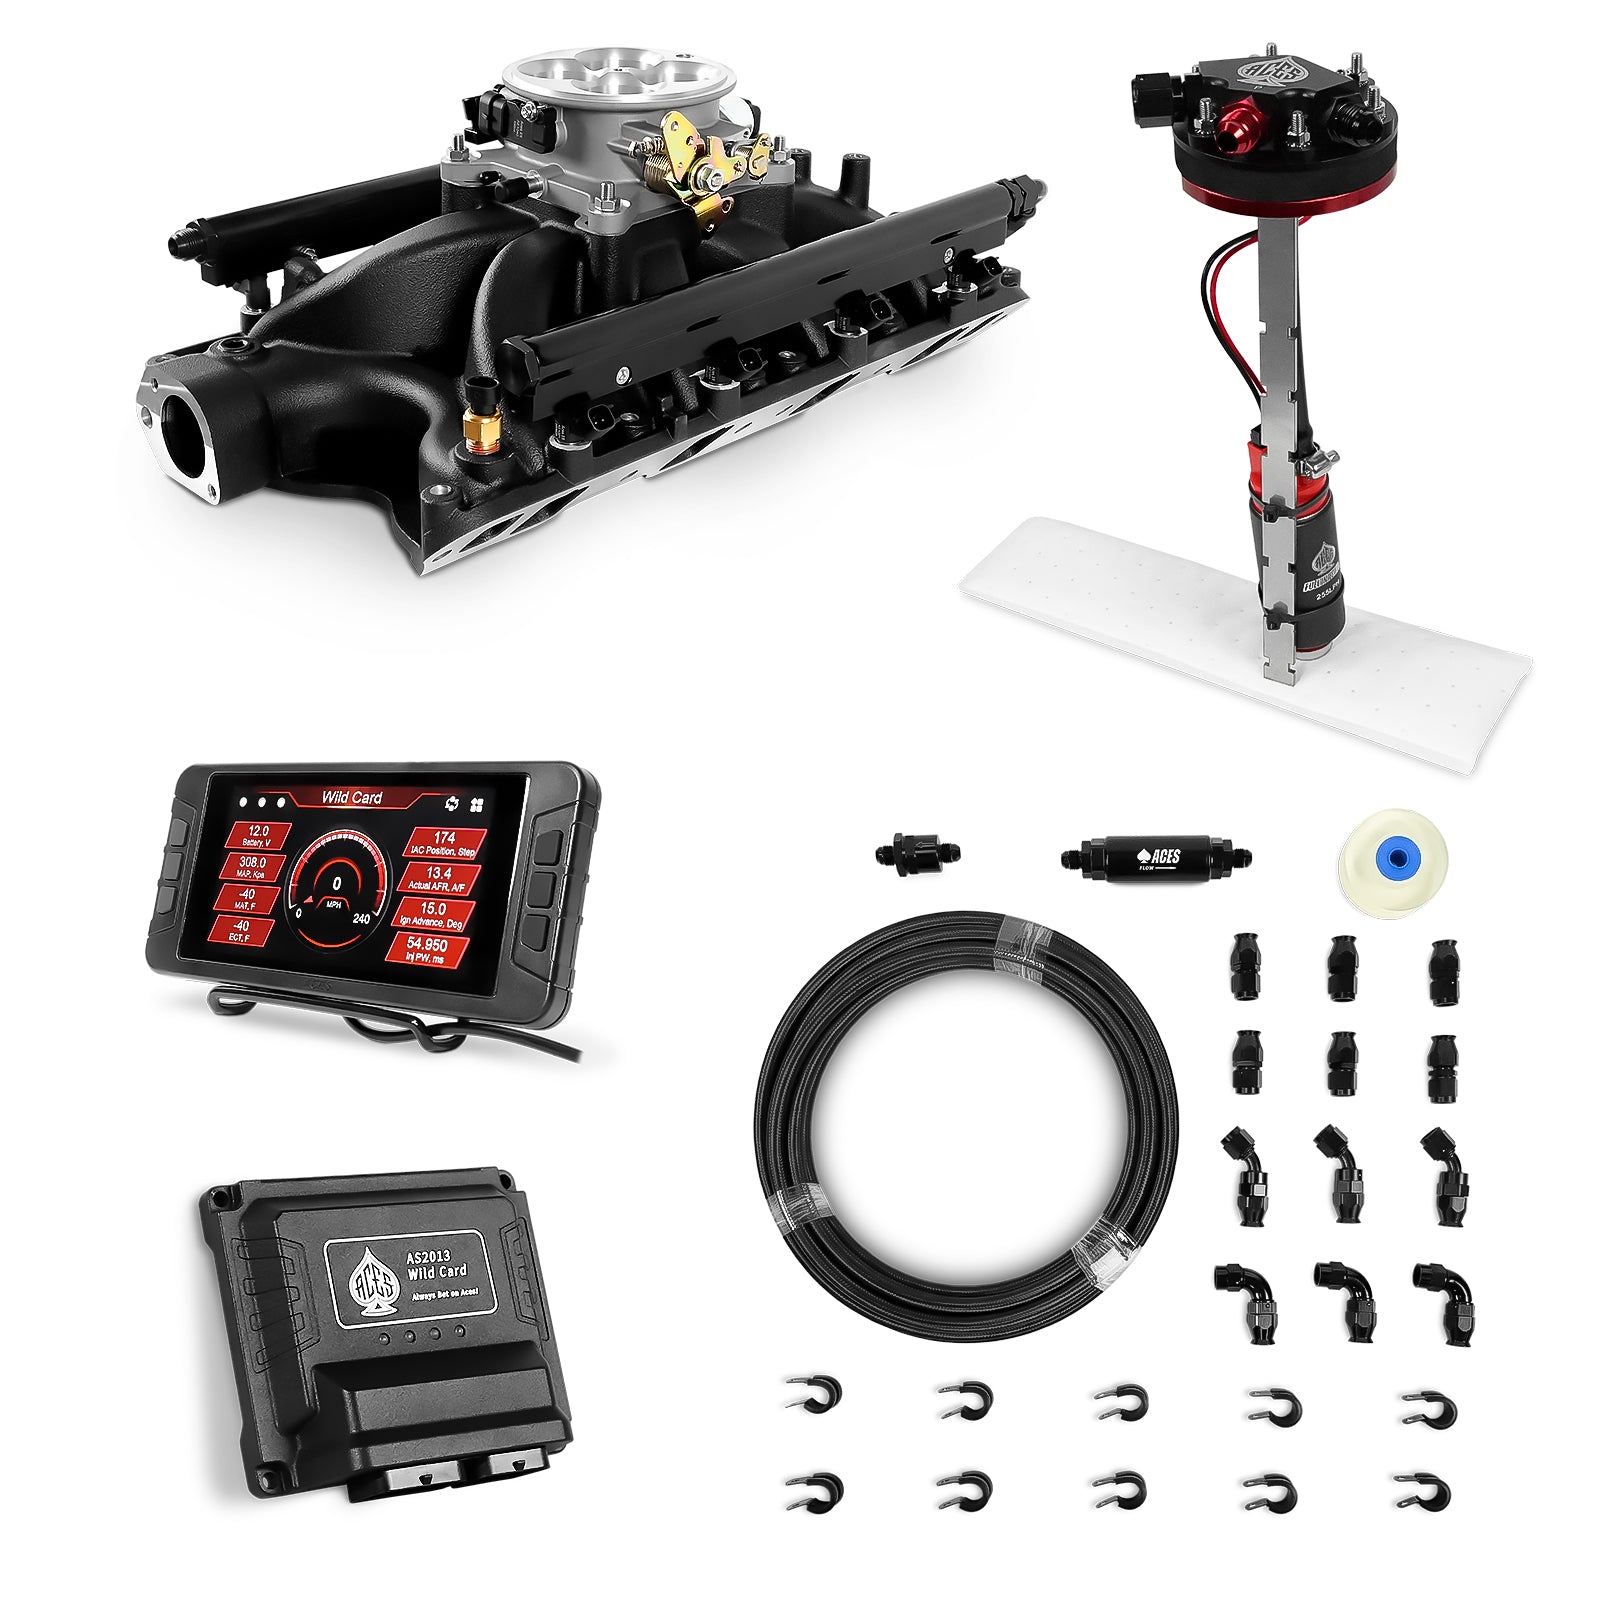 Wild Card Sequential EFI Master Kits